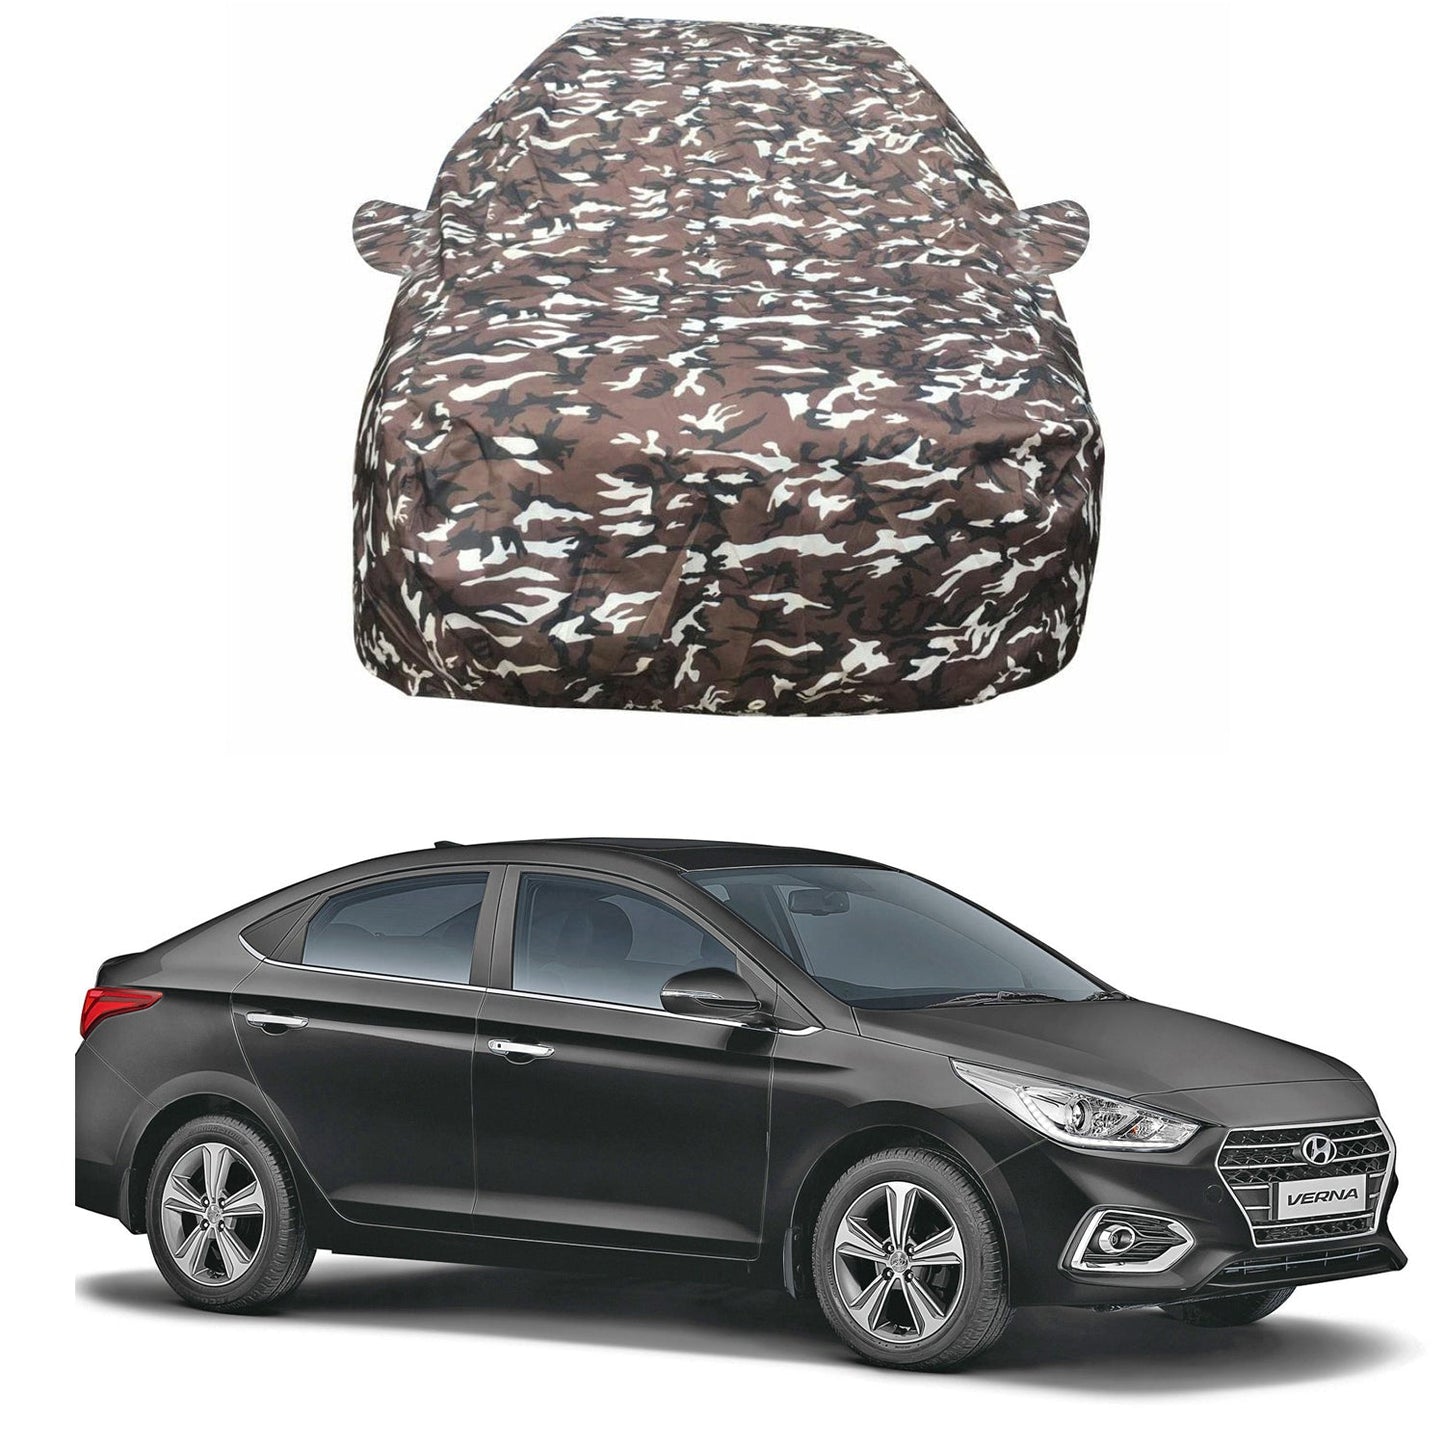 Oshotto Ranger Design Made of 100% Waterproof Fabric Multicolor Car Body Cover with Mirror Pockets For Hyundai Verna Old